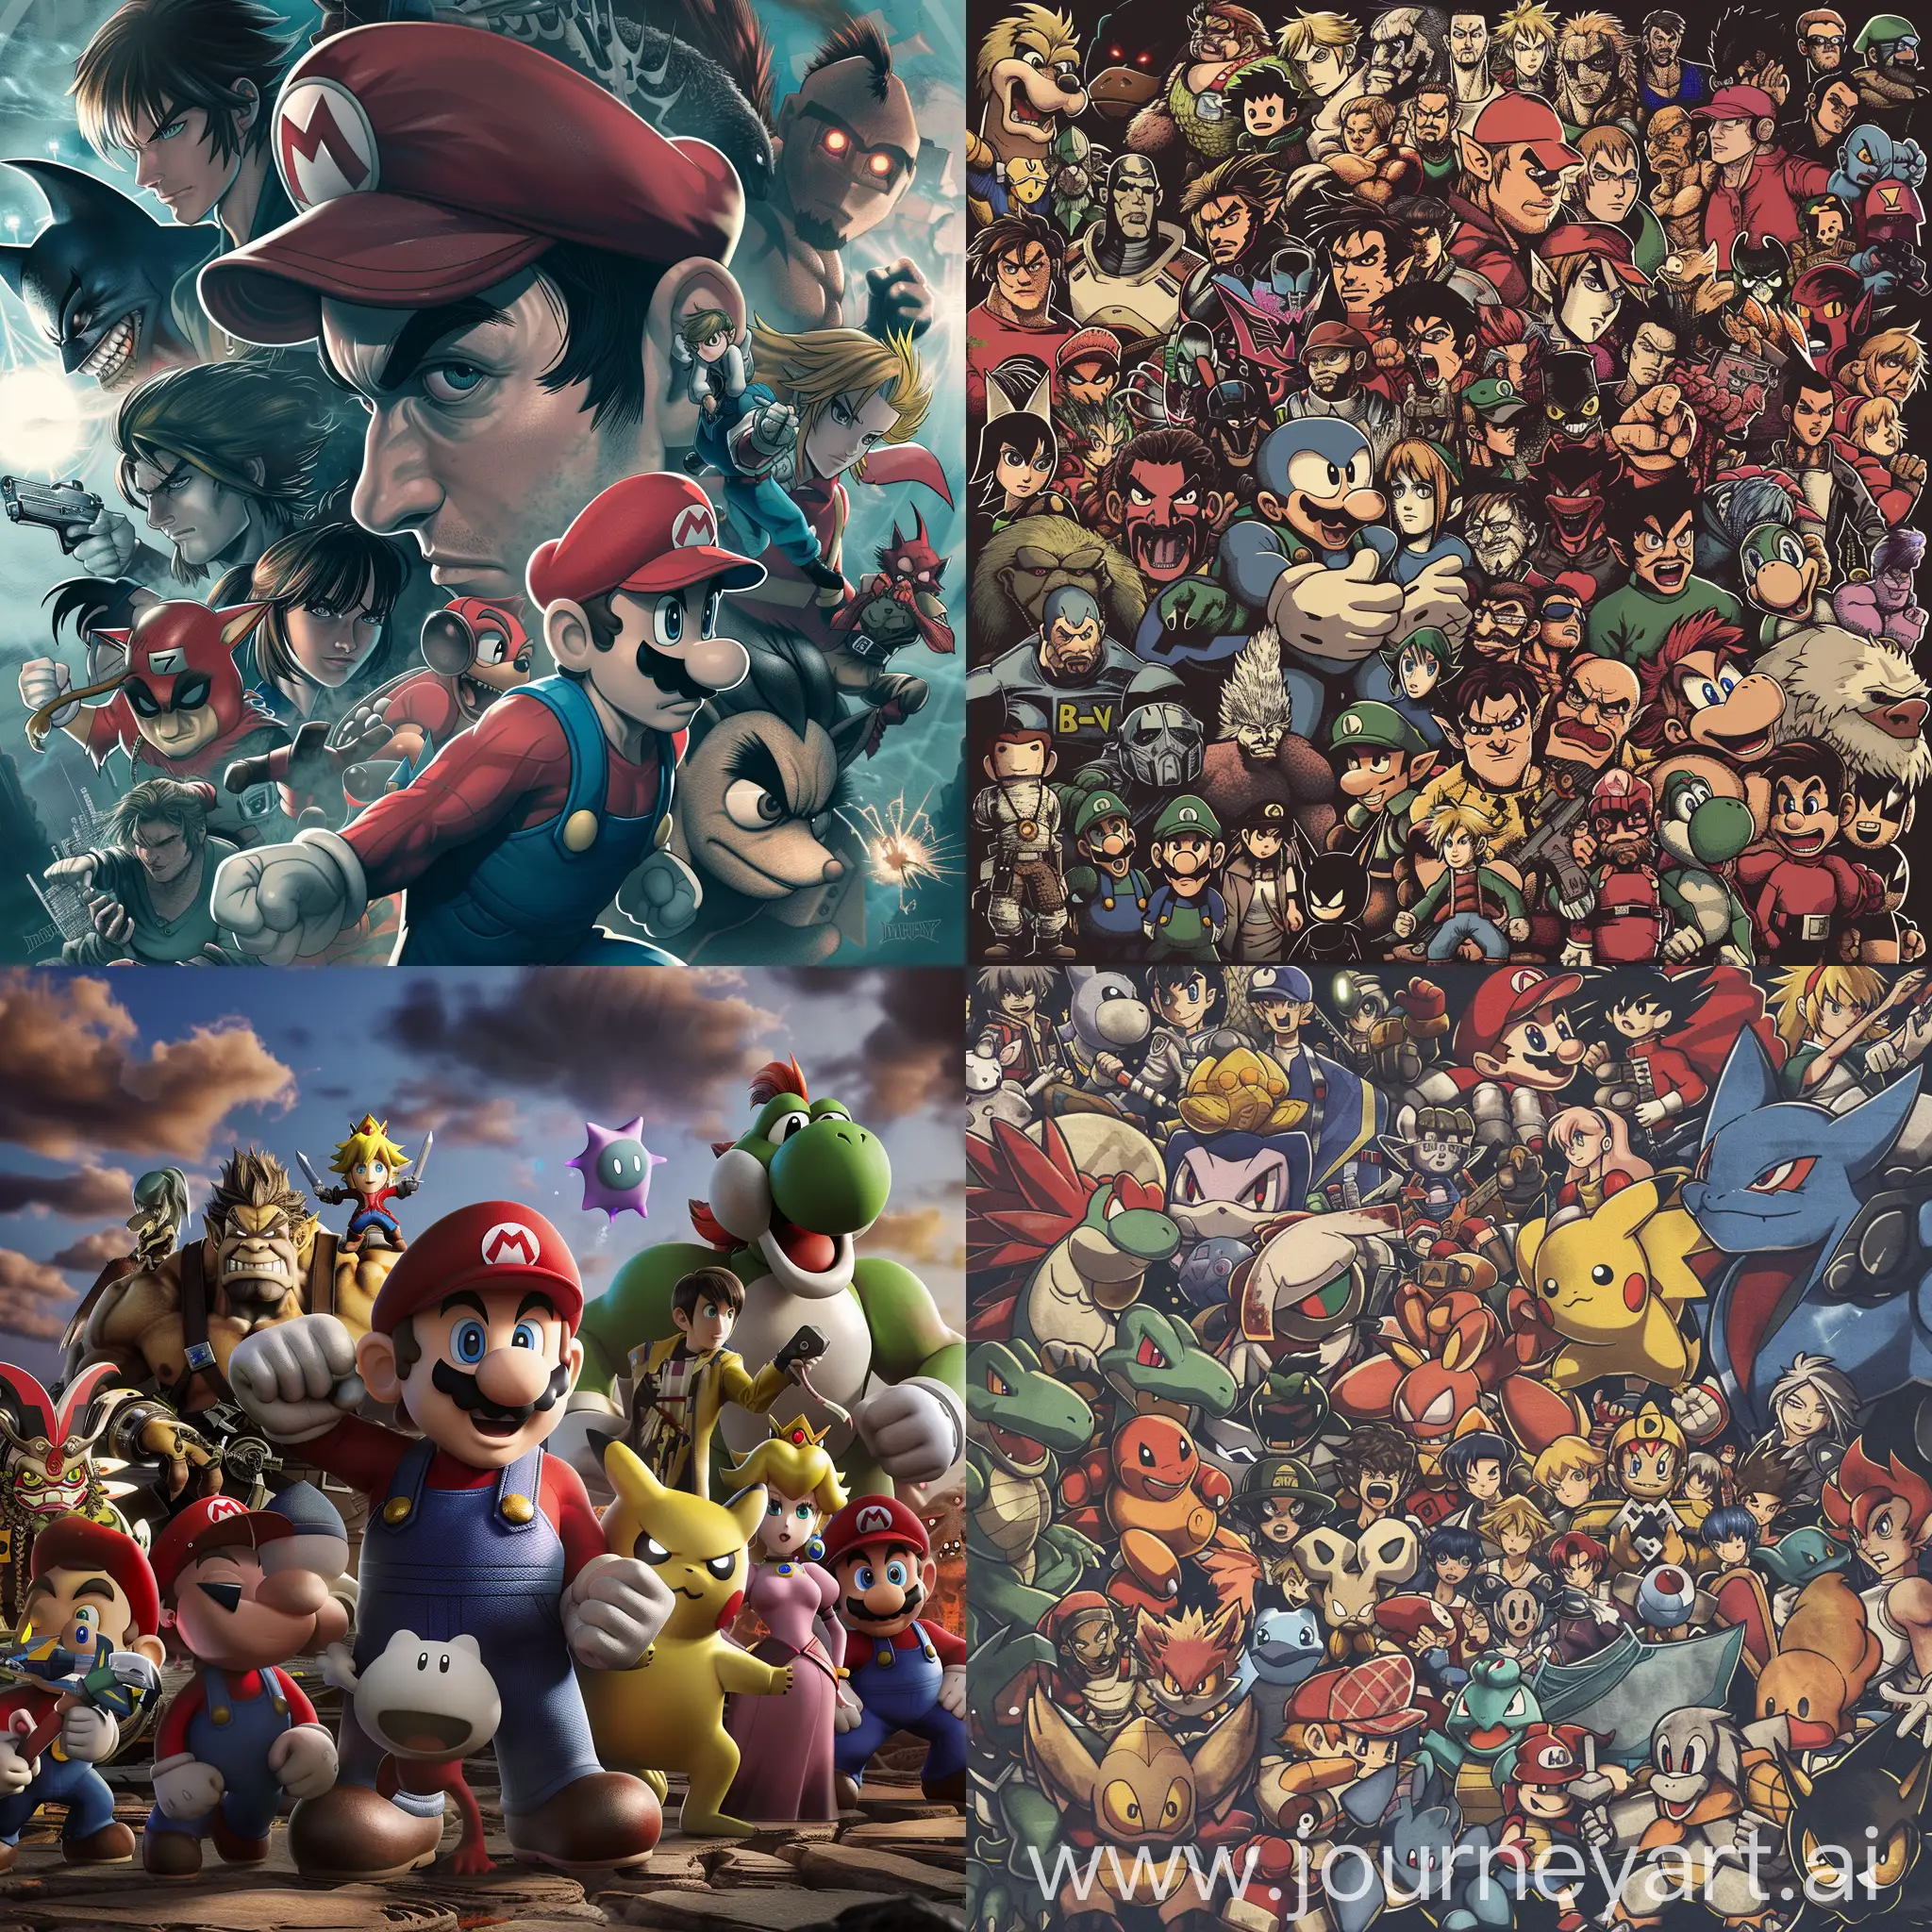 I need a random wallpaper for march with many hidden videogame characters